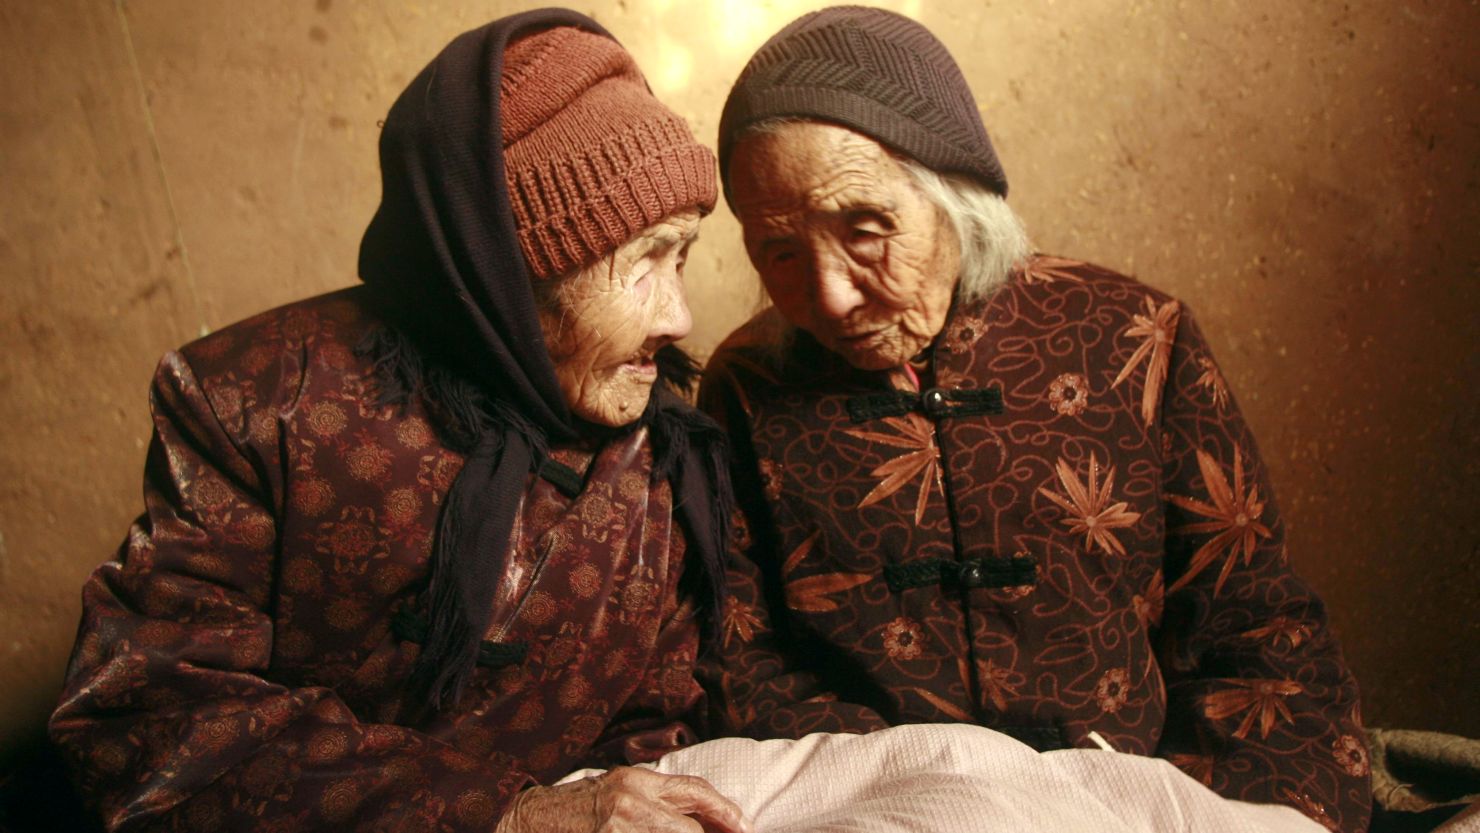 Chinese twins Cao Xiaoqiao, left, and Cao Daqiao were 104 when this photo was taken in 2009. 